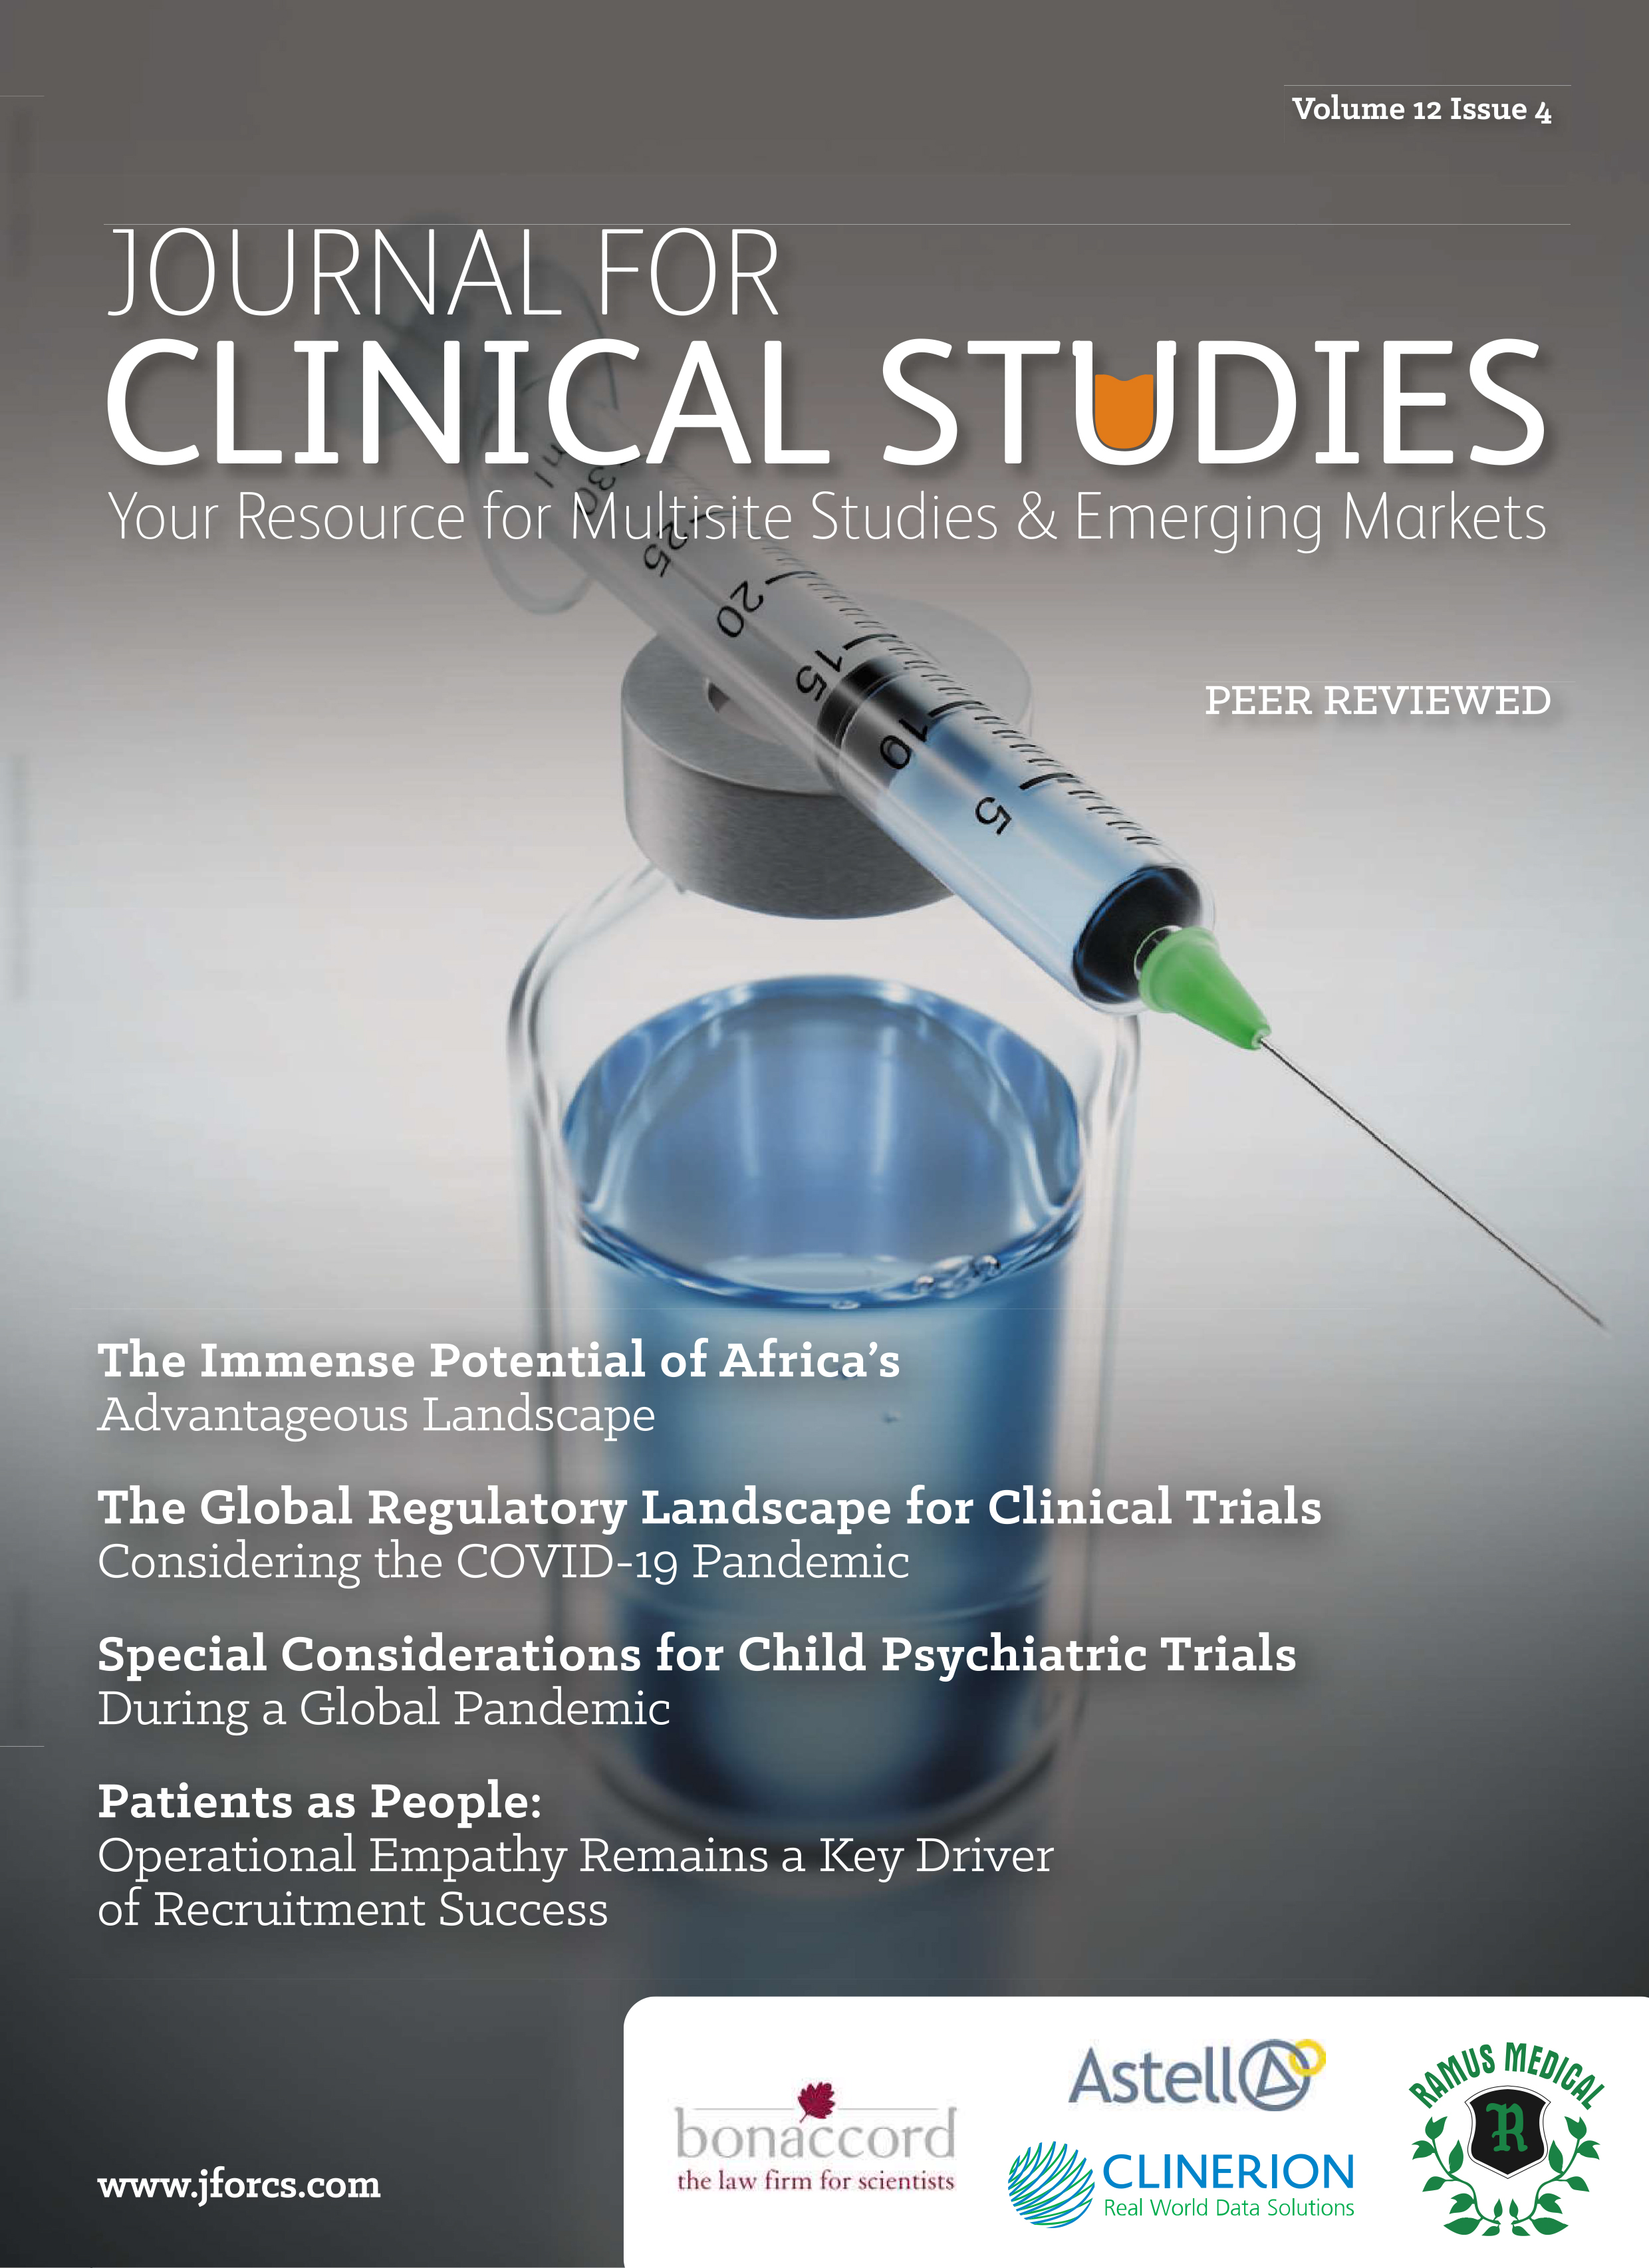 Clinerion article: Finding and Treating Rare Disease Patients in a Global Digital Haybale (Journal for Clinical Studies)